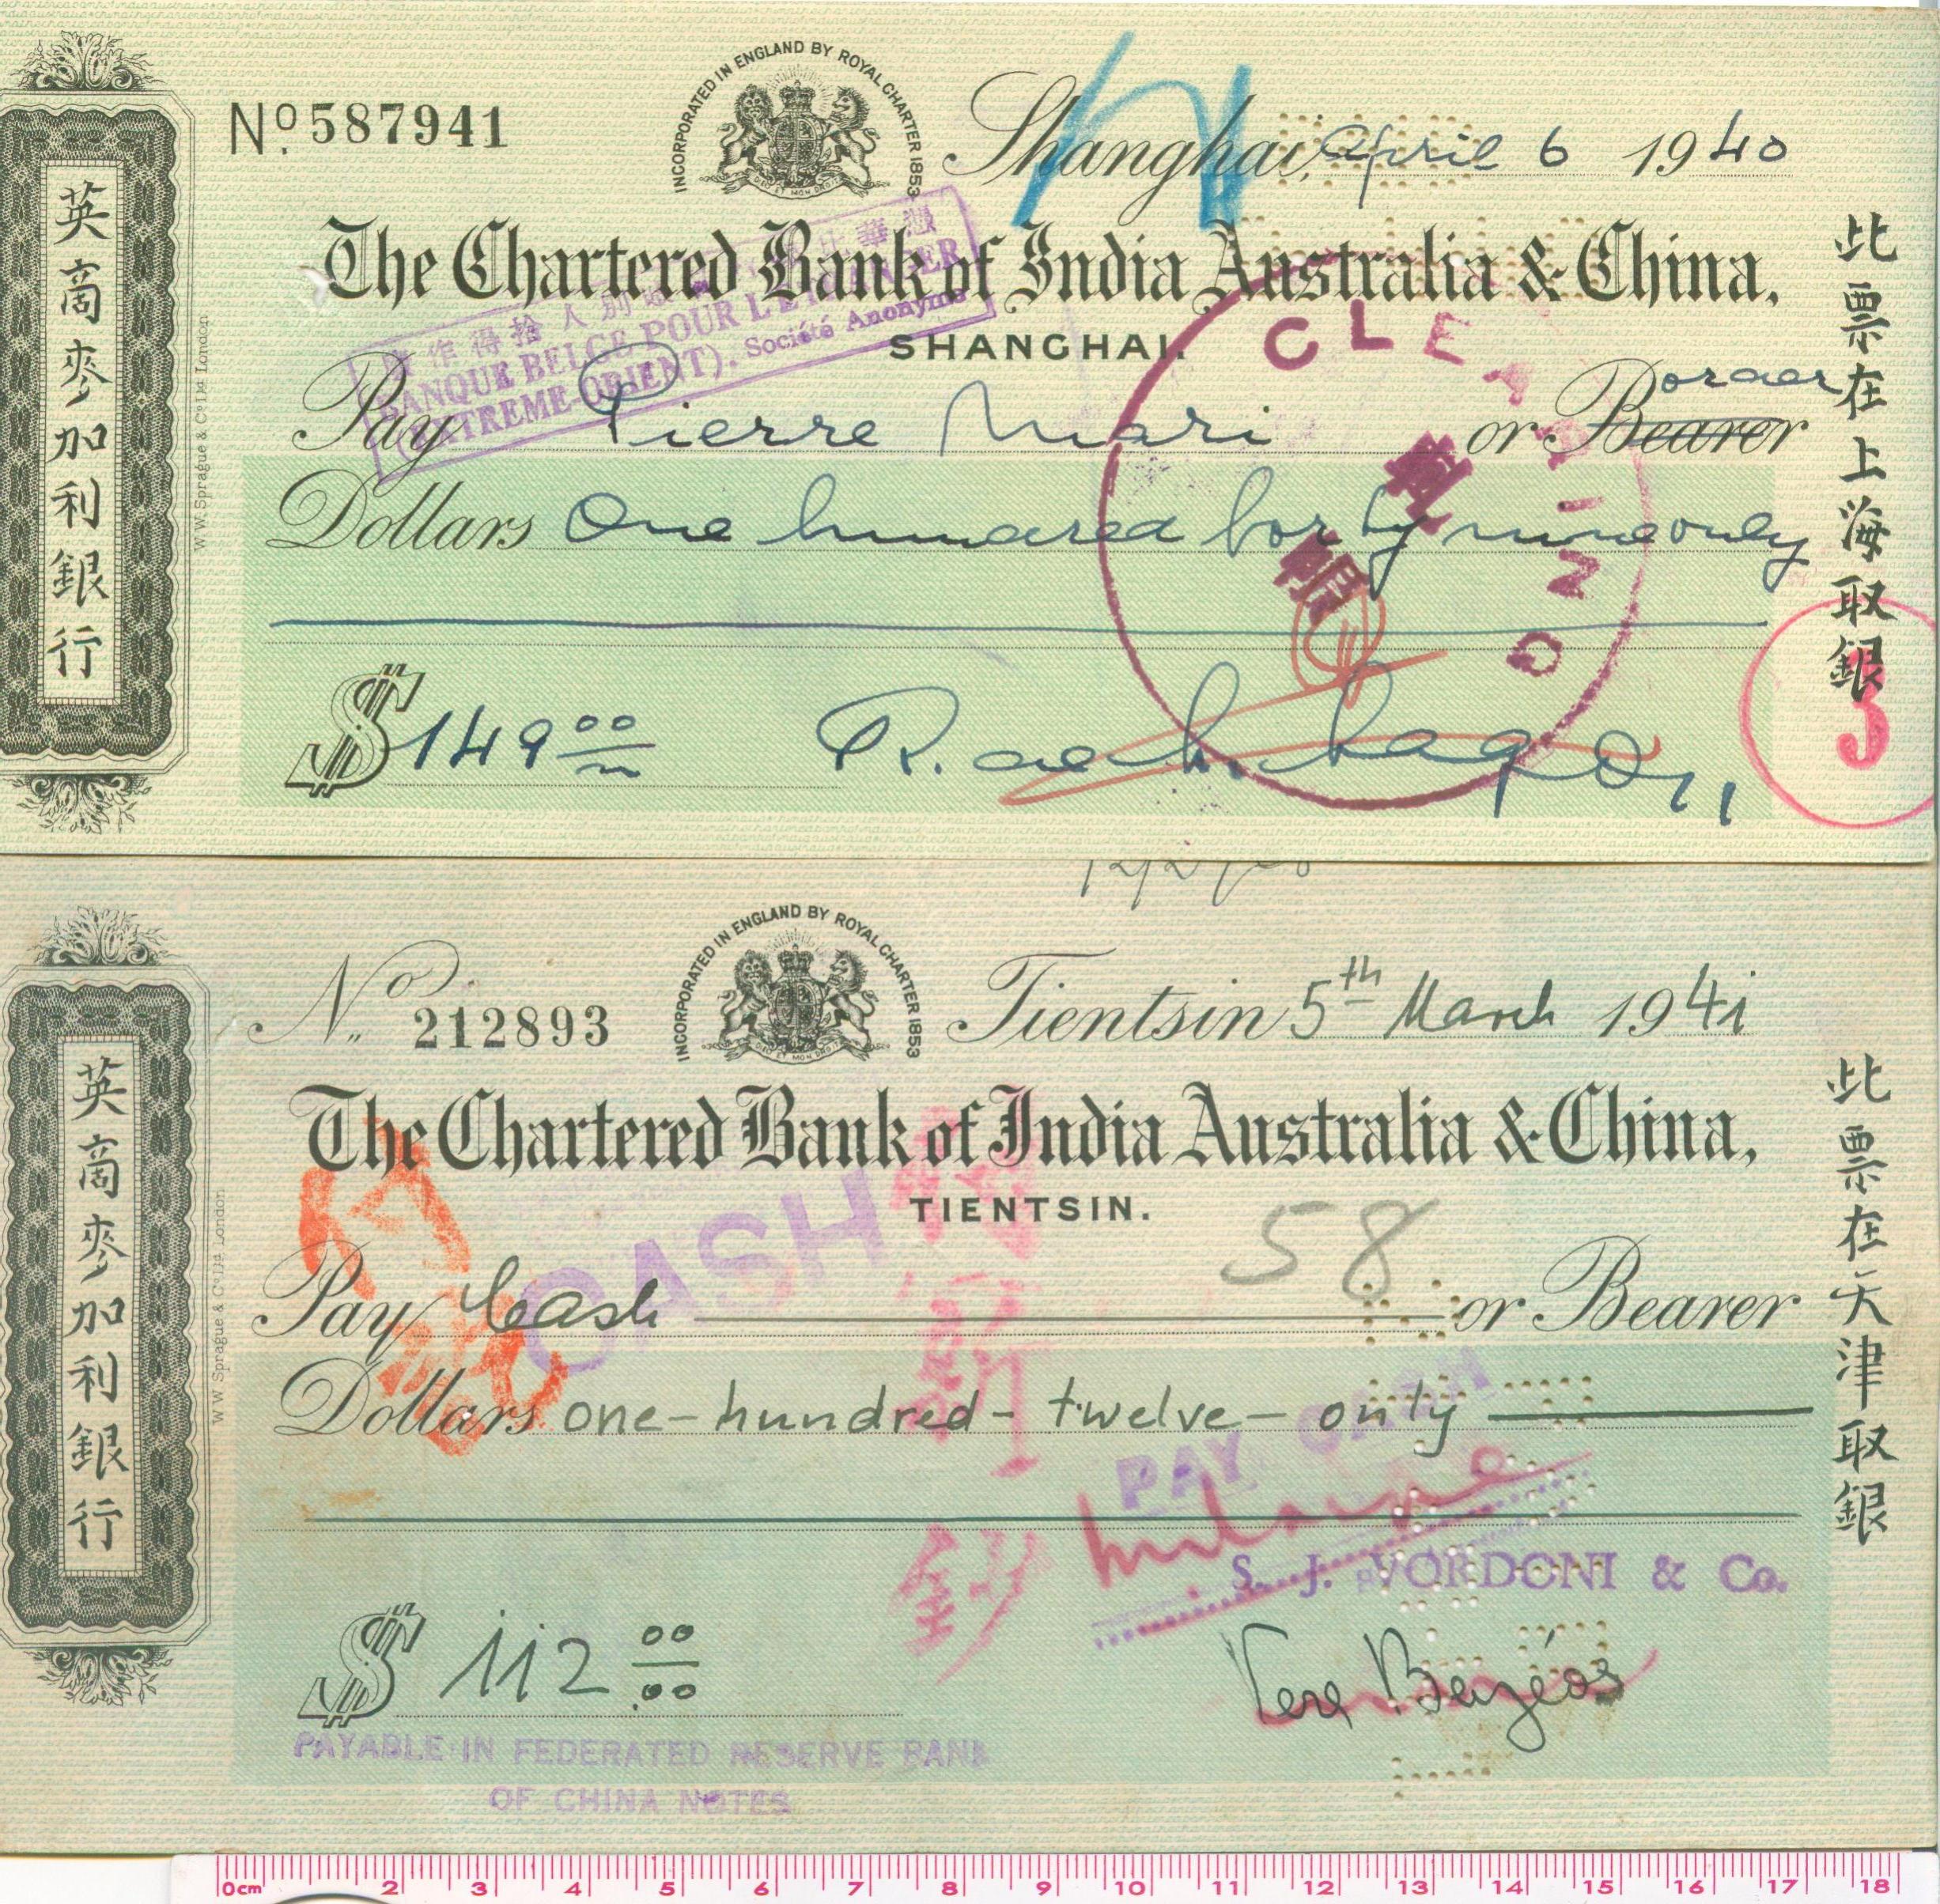 D2420, Two Checks of Charted Bank of India, Australia & China, 1940's